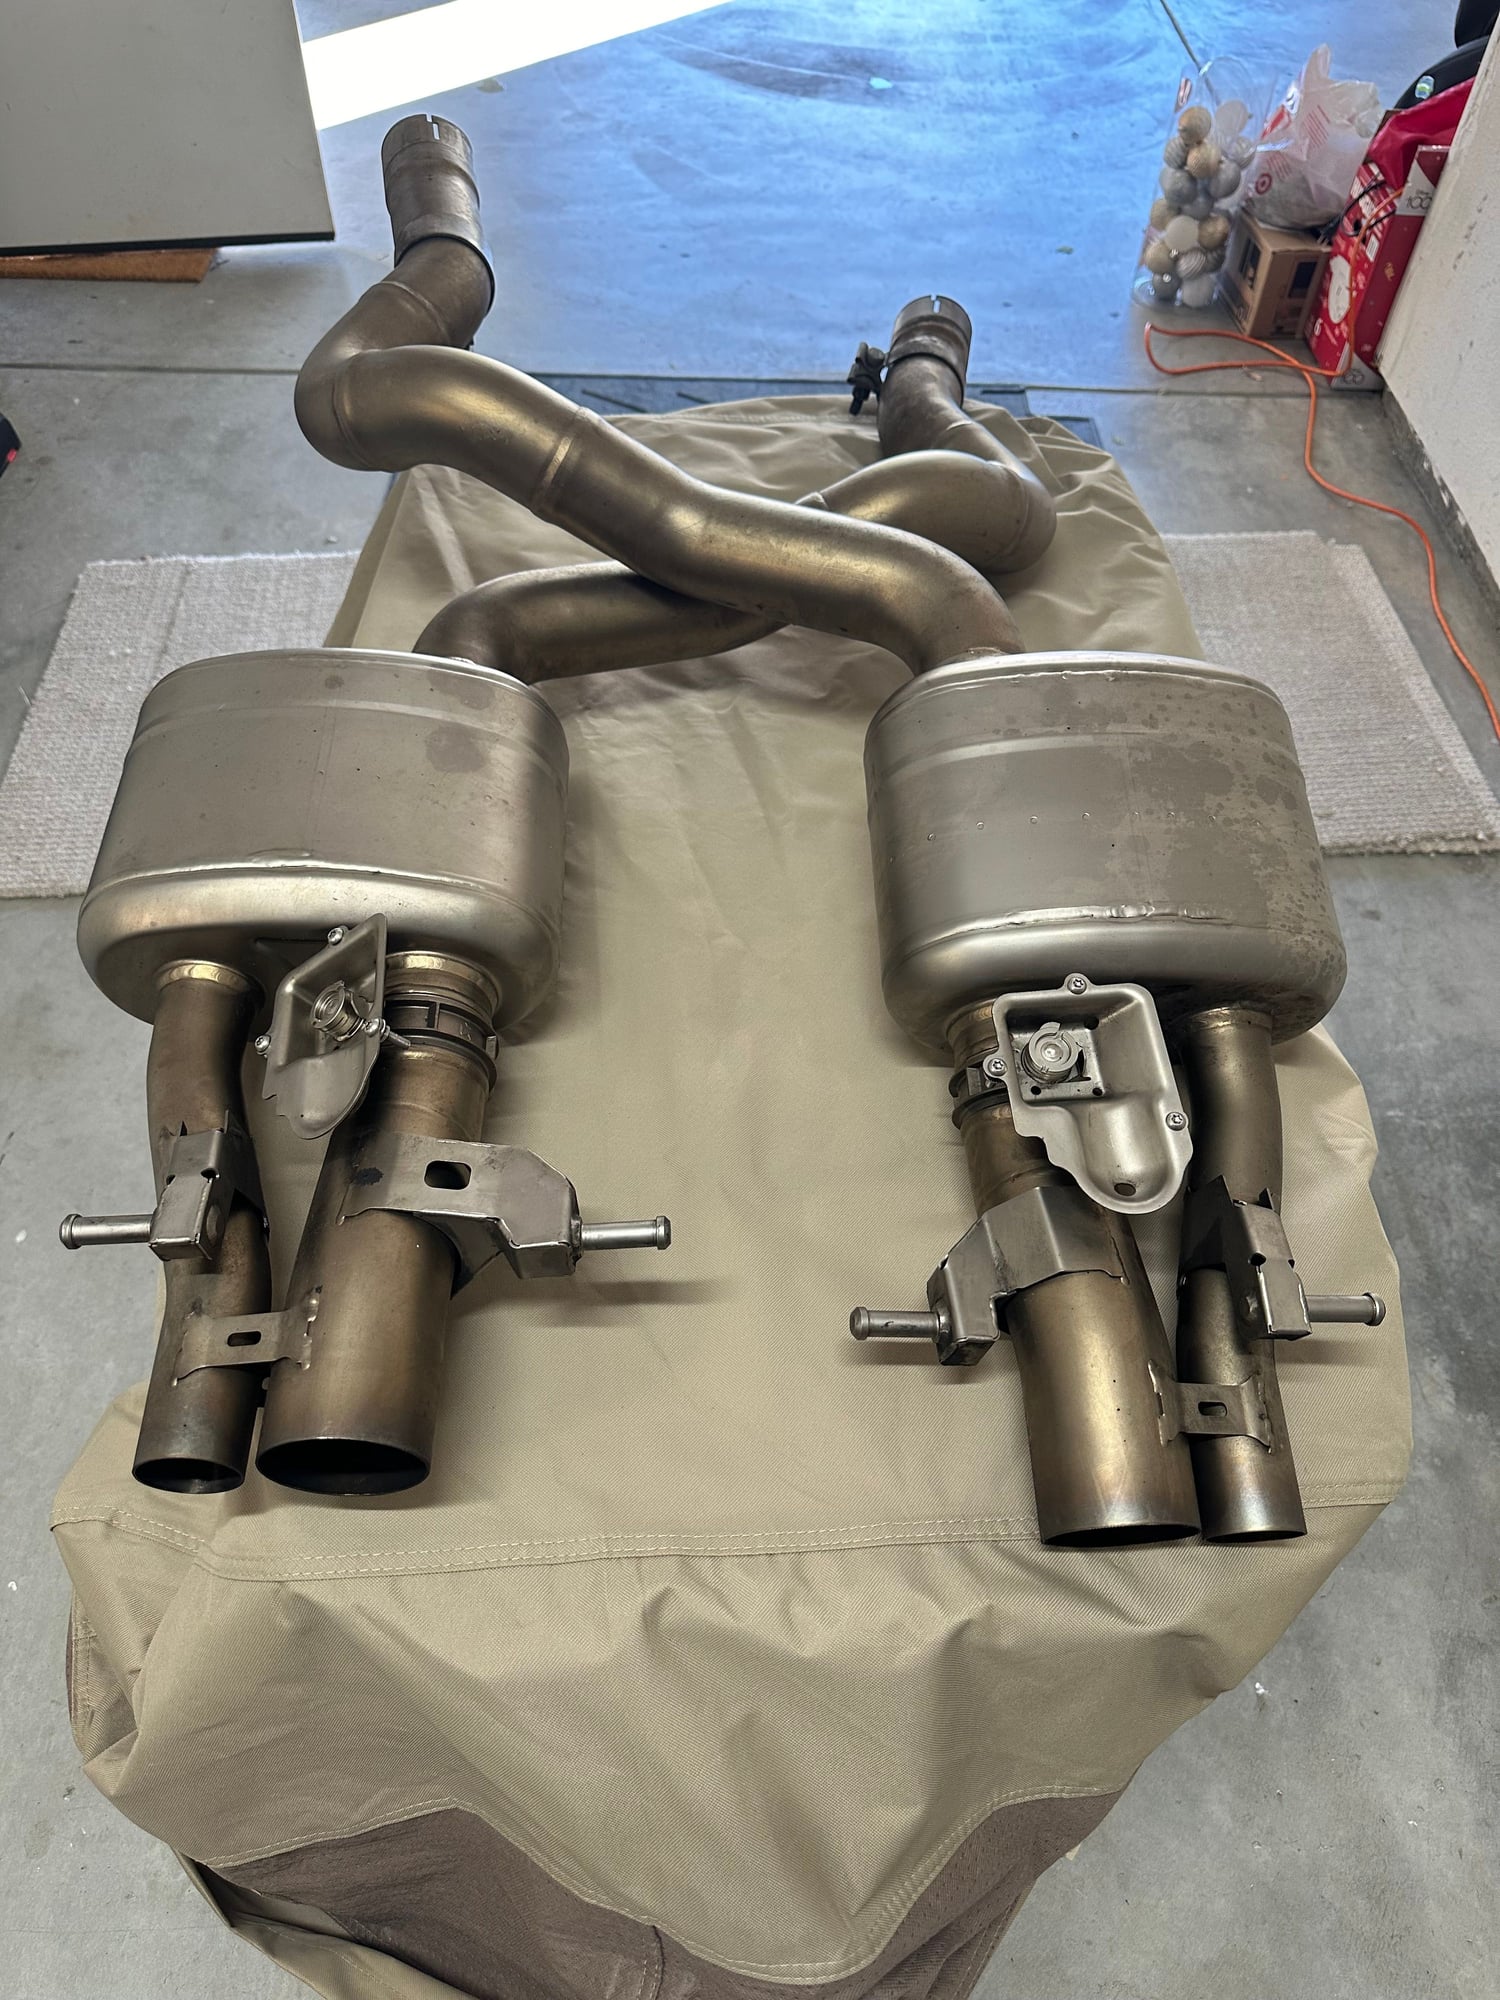 Engine - Exhaust - Akrapovic exhaust off 2019 E63s - Used - 2018 to 2022 Mercedes-Benz E63 AMG S - Thousands Oaks Area, CA 91362, United States